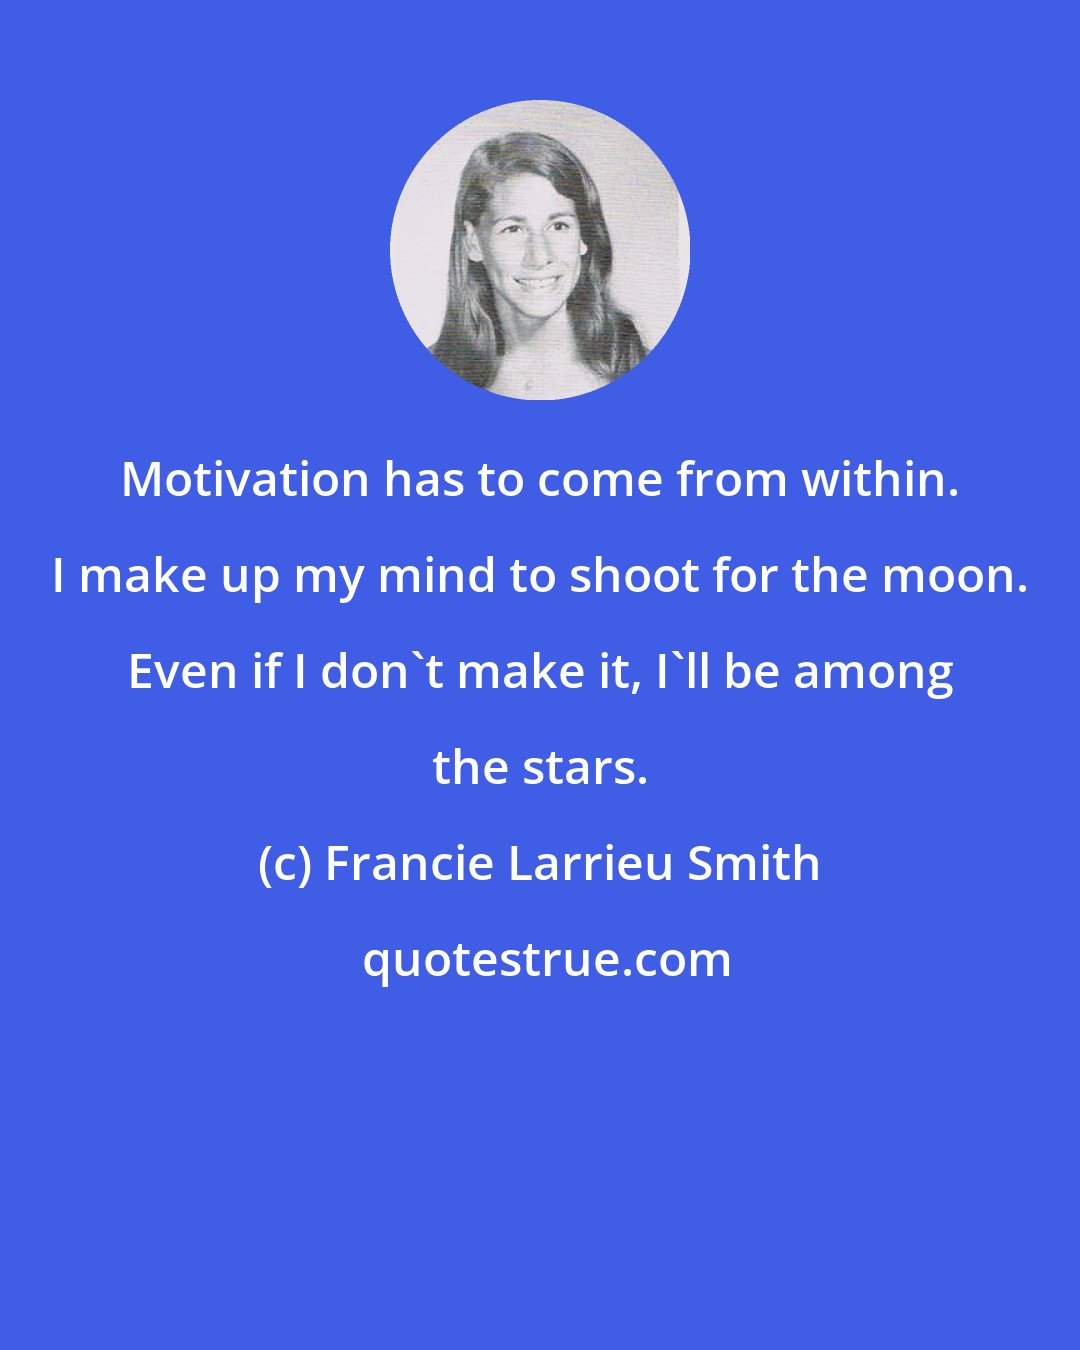 Francie Larrieu Smith: Motivation has to come from within. I make up my mind to shoot for the moon. Even if I don't make it, I'll be among the stars.